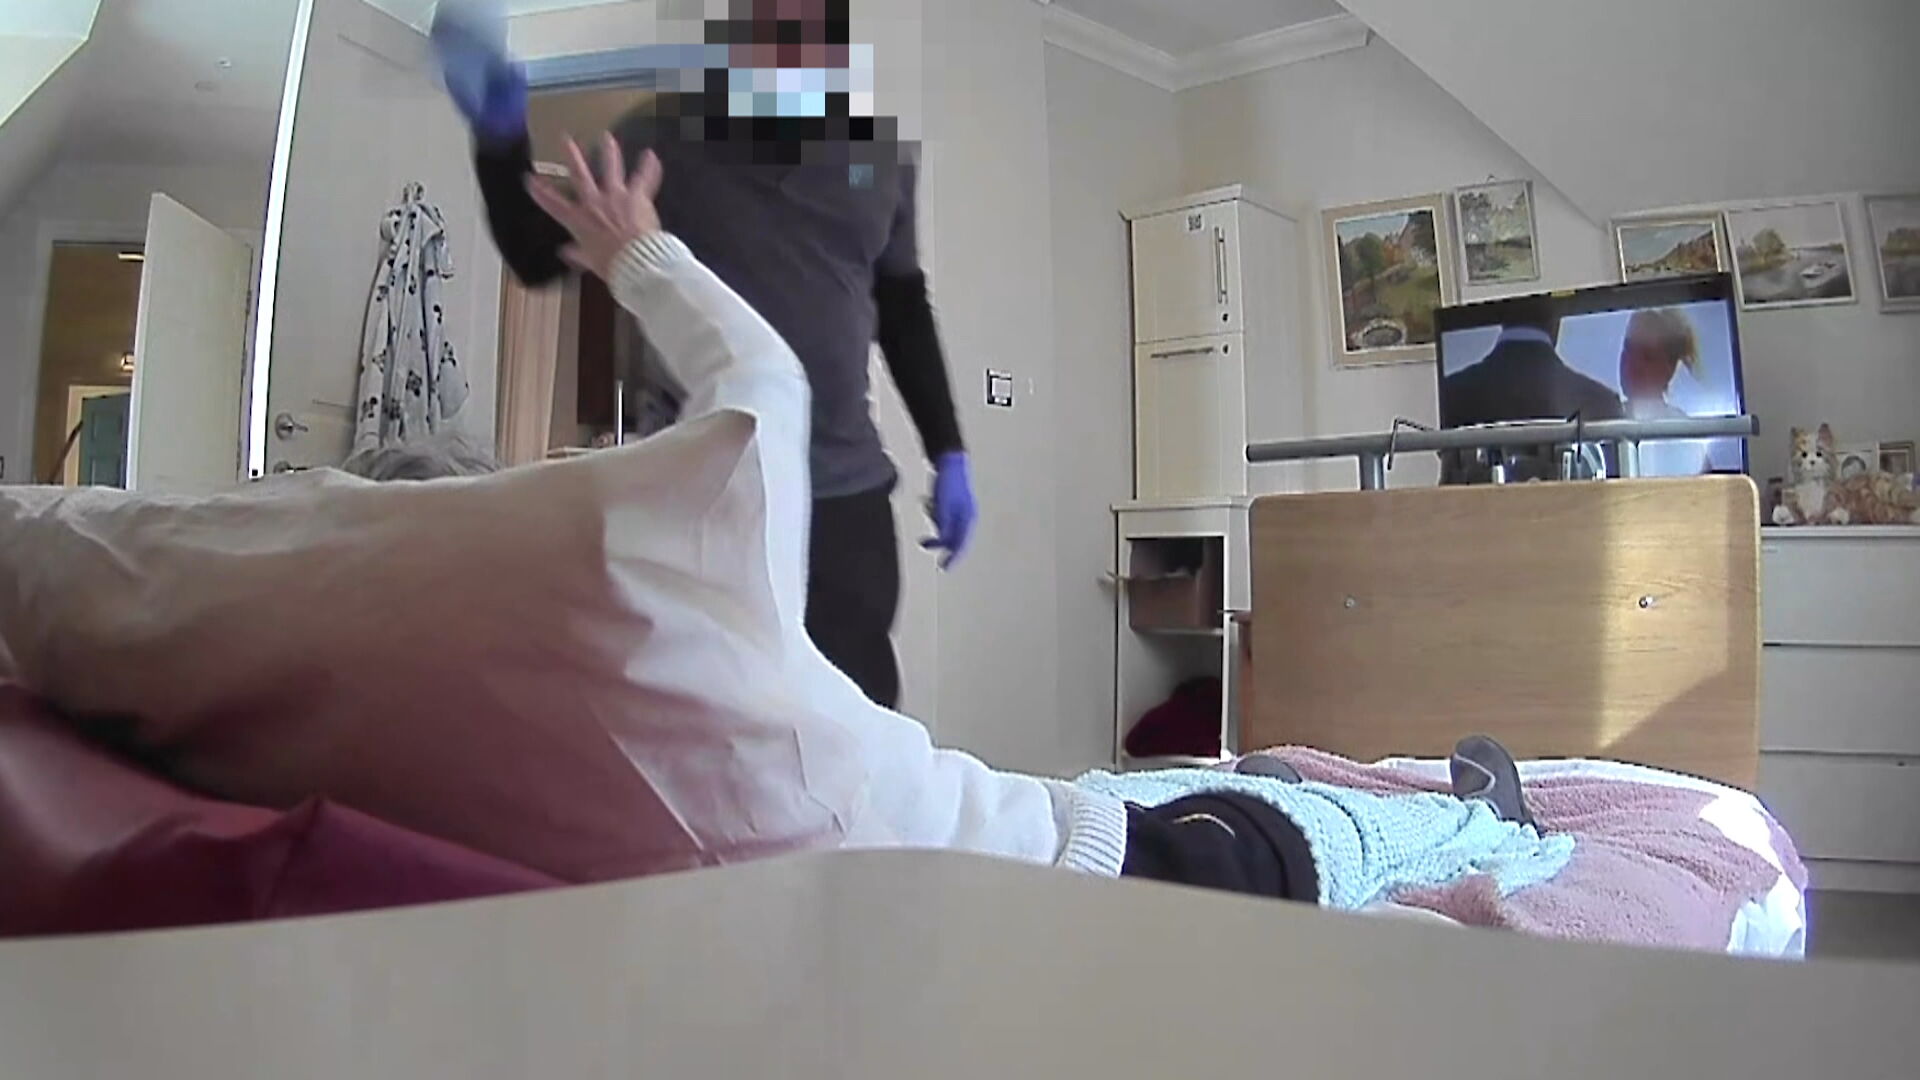 Real Hidden Cam Drunk Sex - Caught on hidden cameras - yet just 1% of care home abuse ends in charges |  ITV News